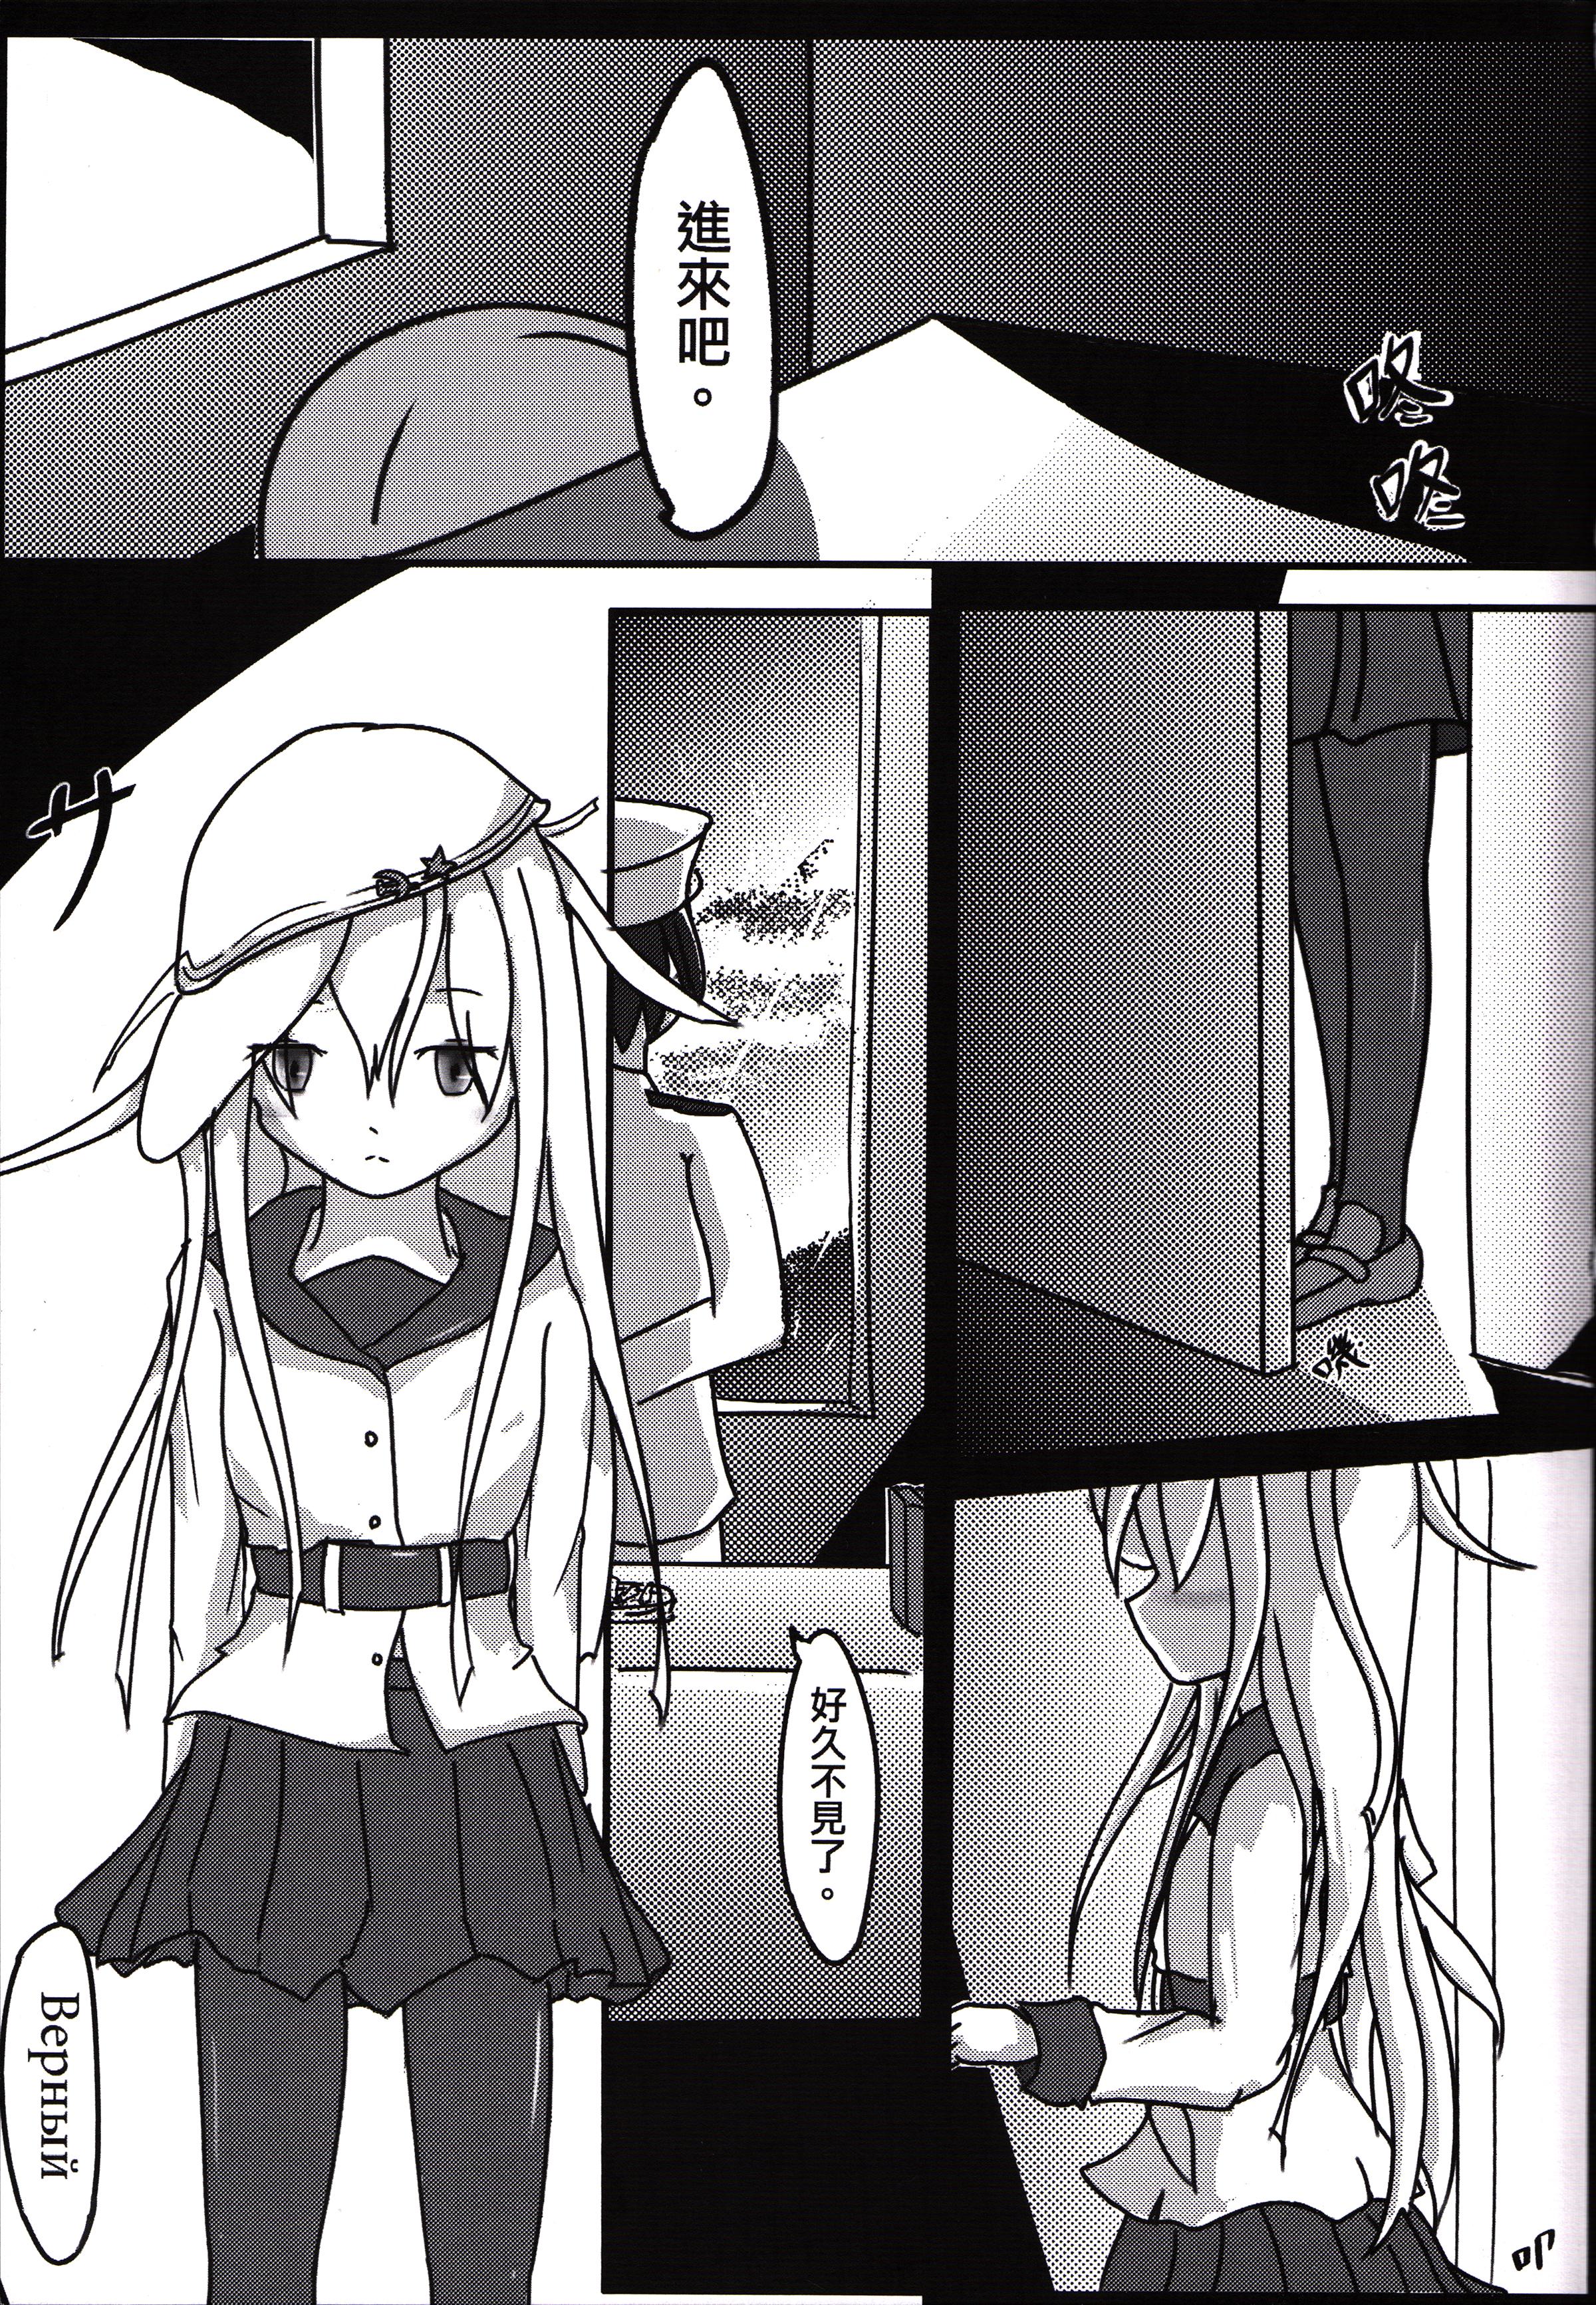 Missionary Position Porn The Night Before Dawn - Kantai collection Mas - Page 5